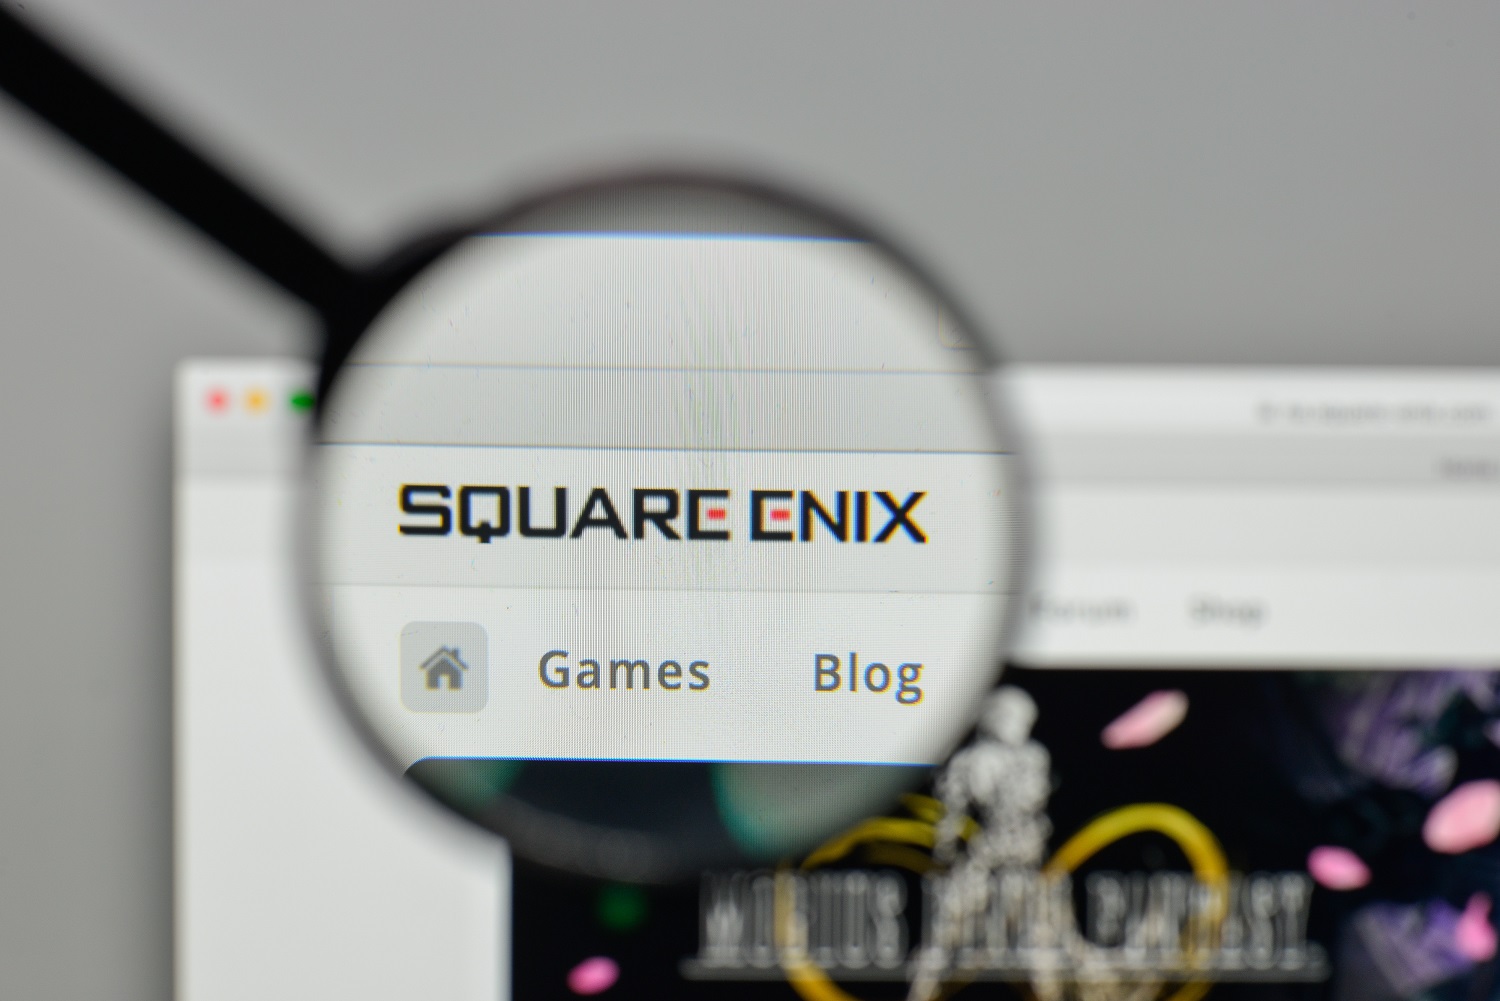 Square Enix decides to go ahead with Web3, Blockchain Gaming Drive